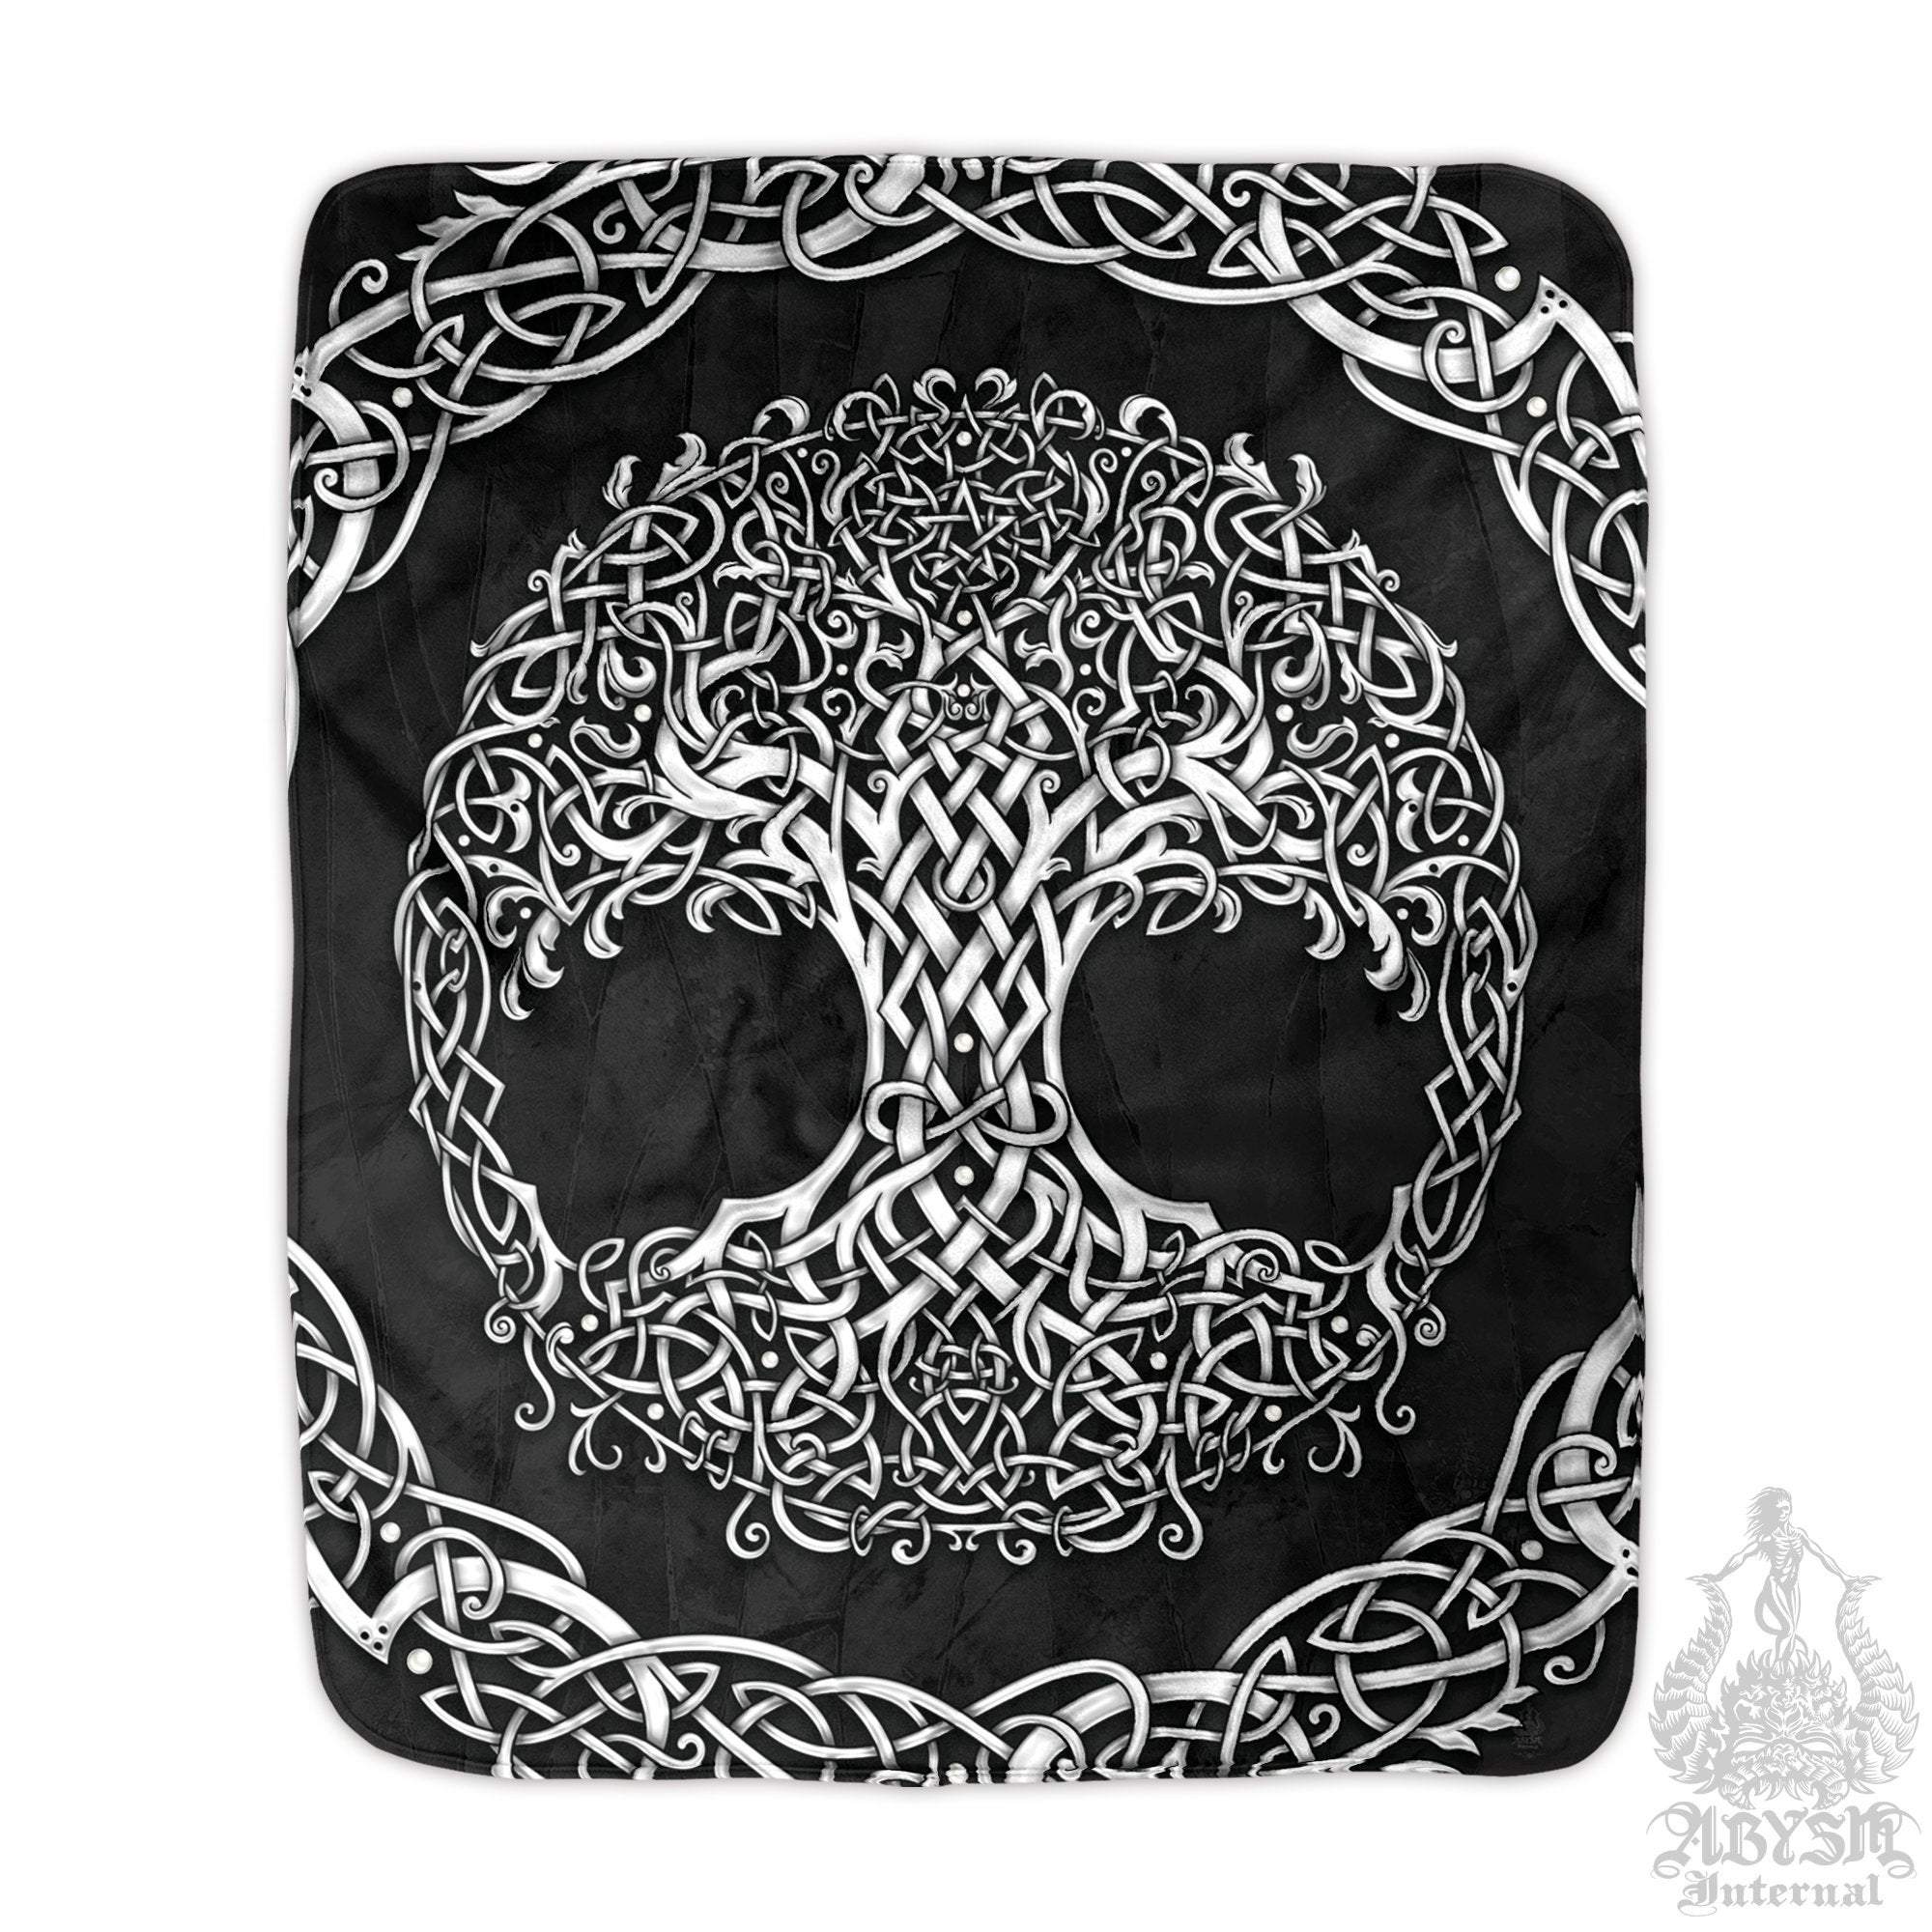 Tree of Life Throw Fleece Blanket, Pagan Decor, Celtic Knot, Witch Room, Wicca - White & Black - Abysm Internal